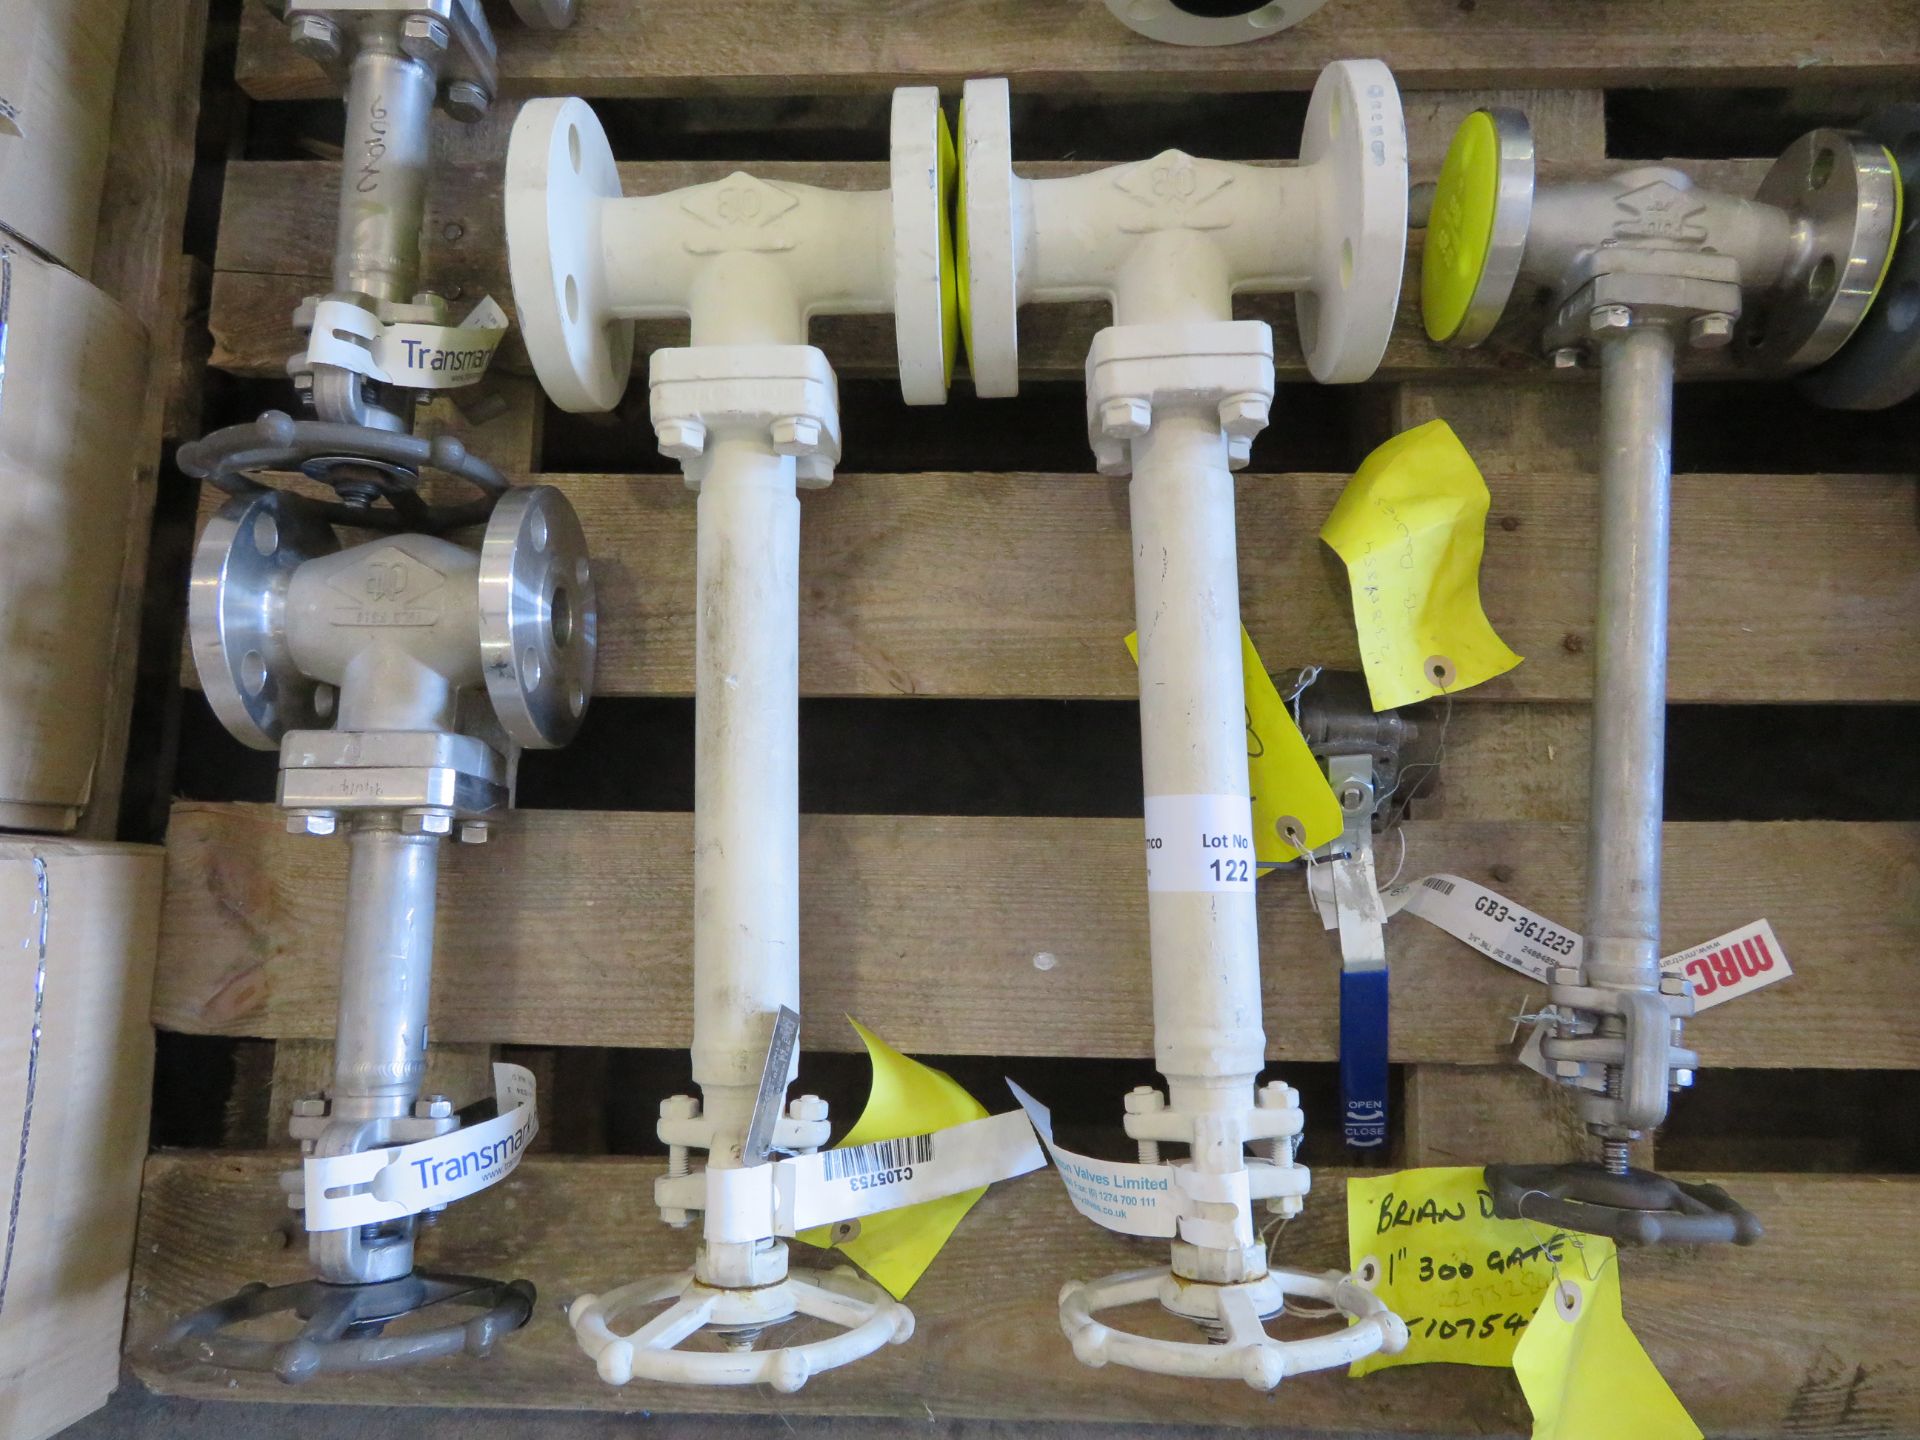 6 X VARIOUS UNUSED WHEEL VALVES, 2 X NEWAY 150LB BALL VALVES AND 2 X - Image 2 of 4